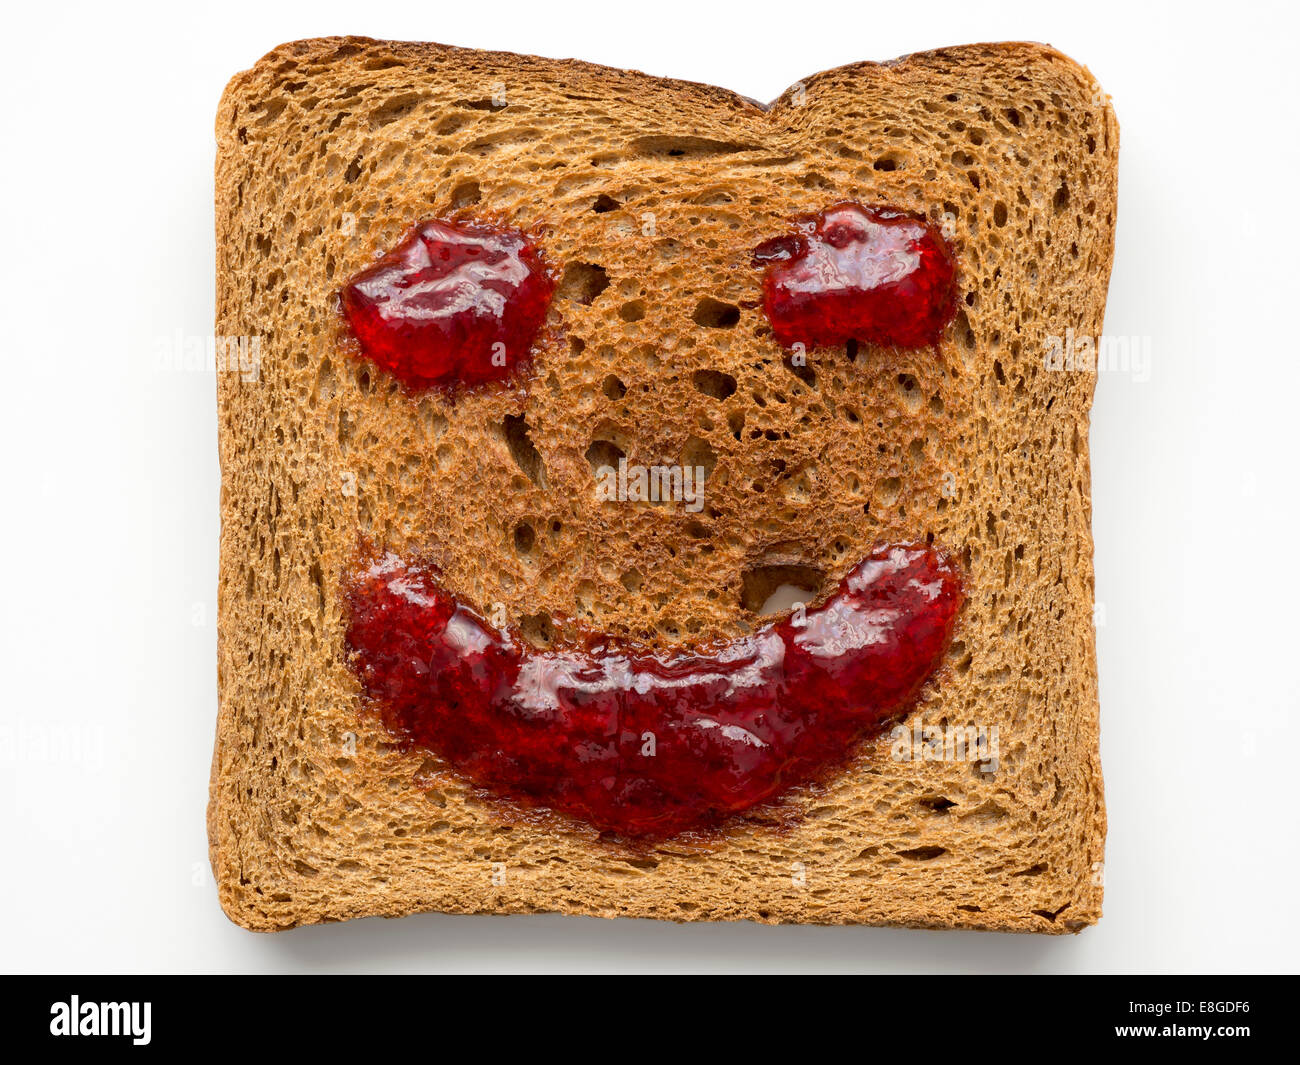 fried toast with red jam in shape of smile Stock Photo